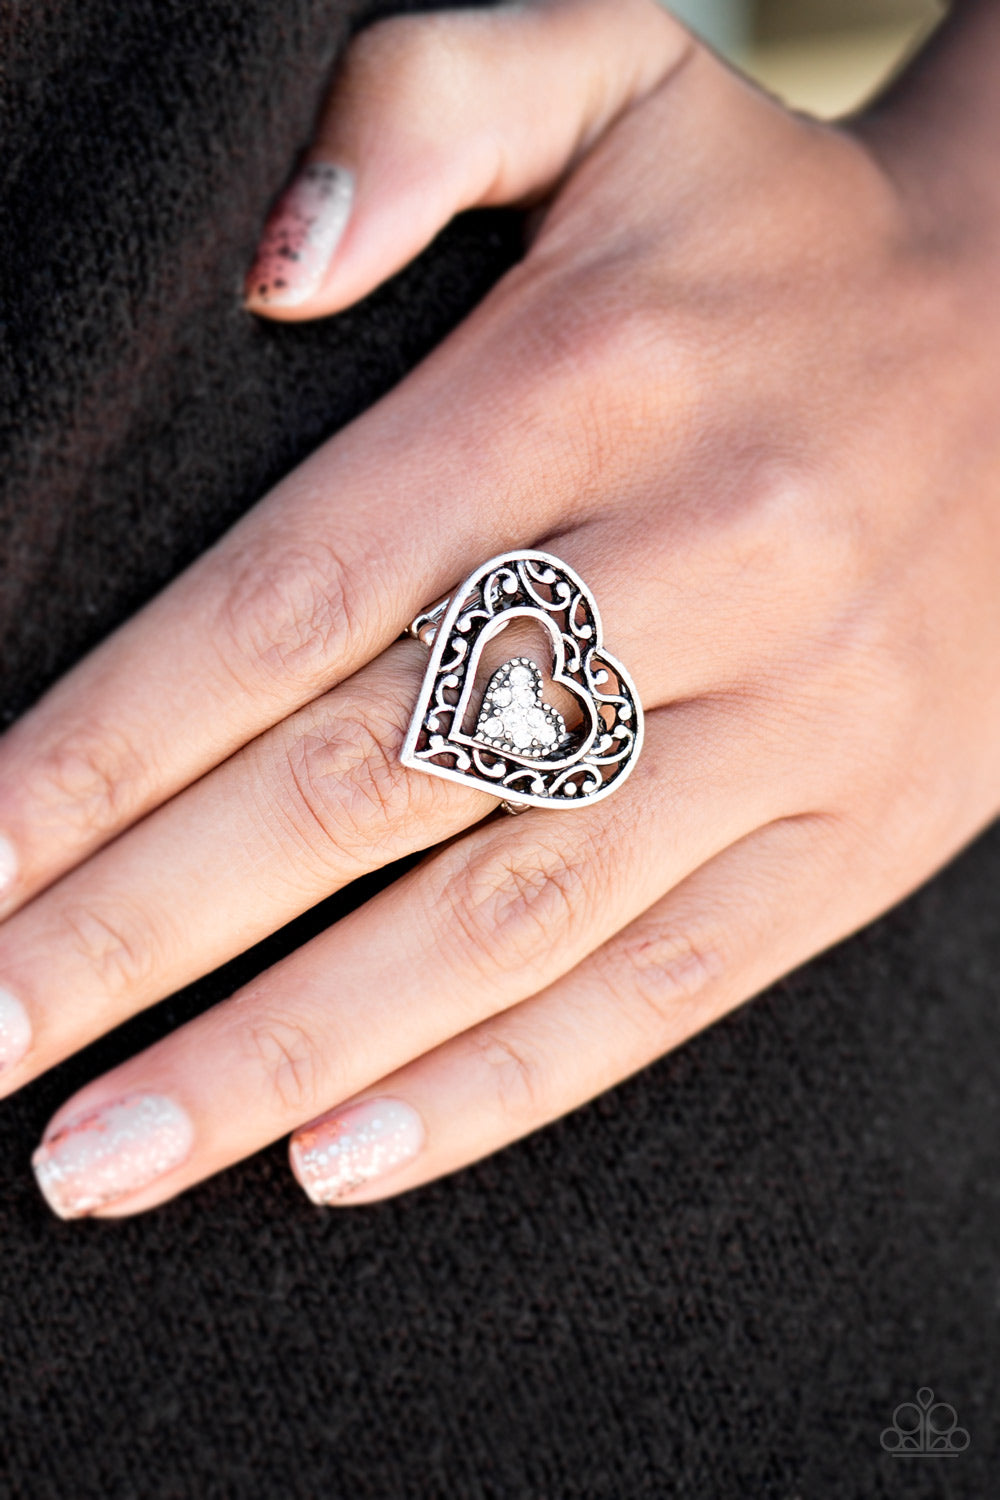 Find it in Your Heart - white - Paparazzi ring